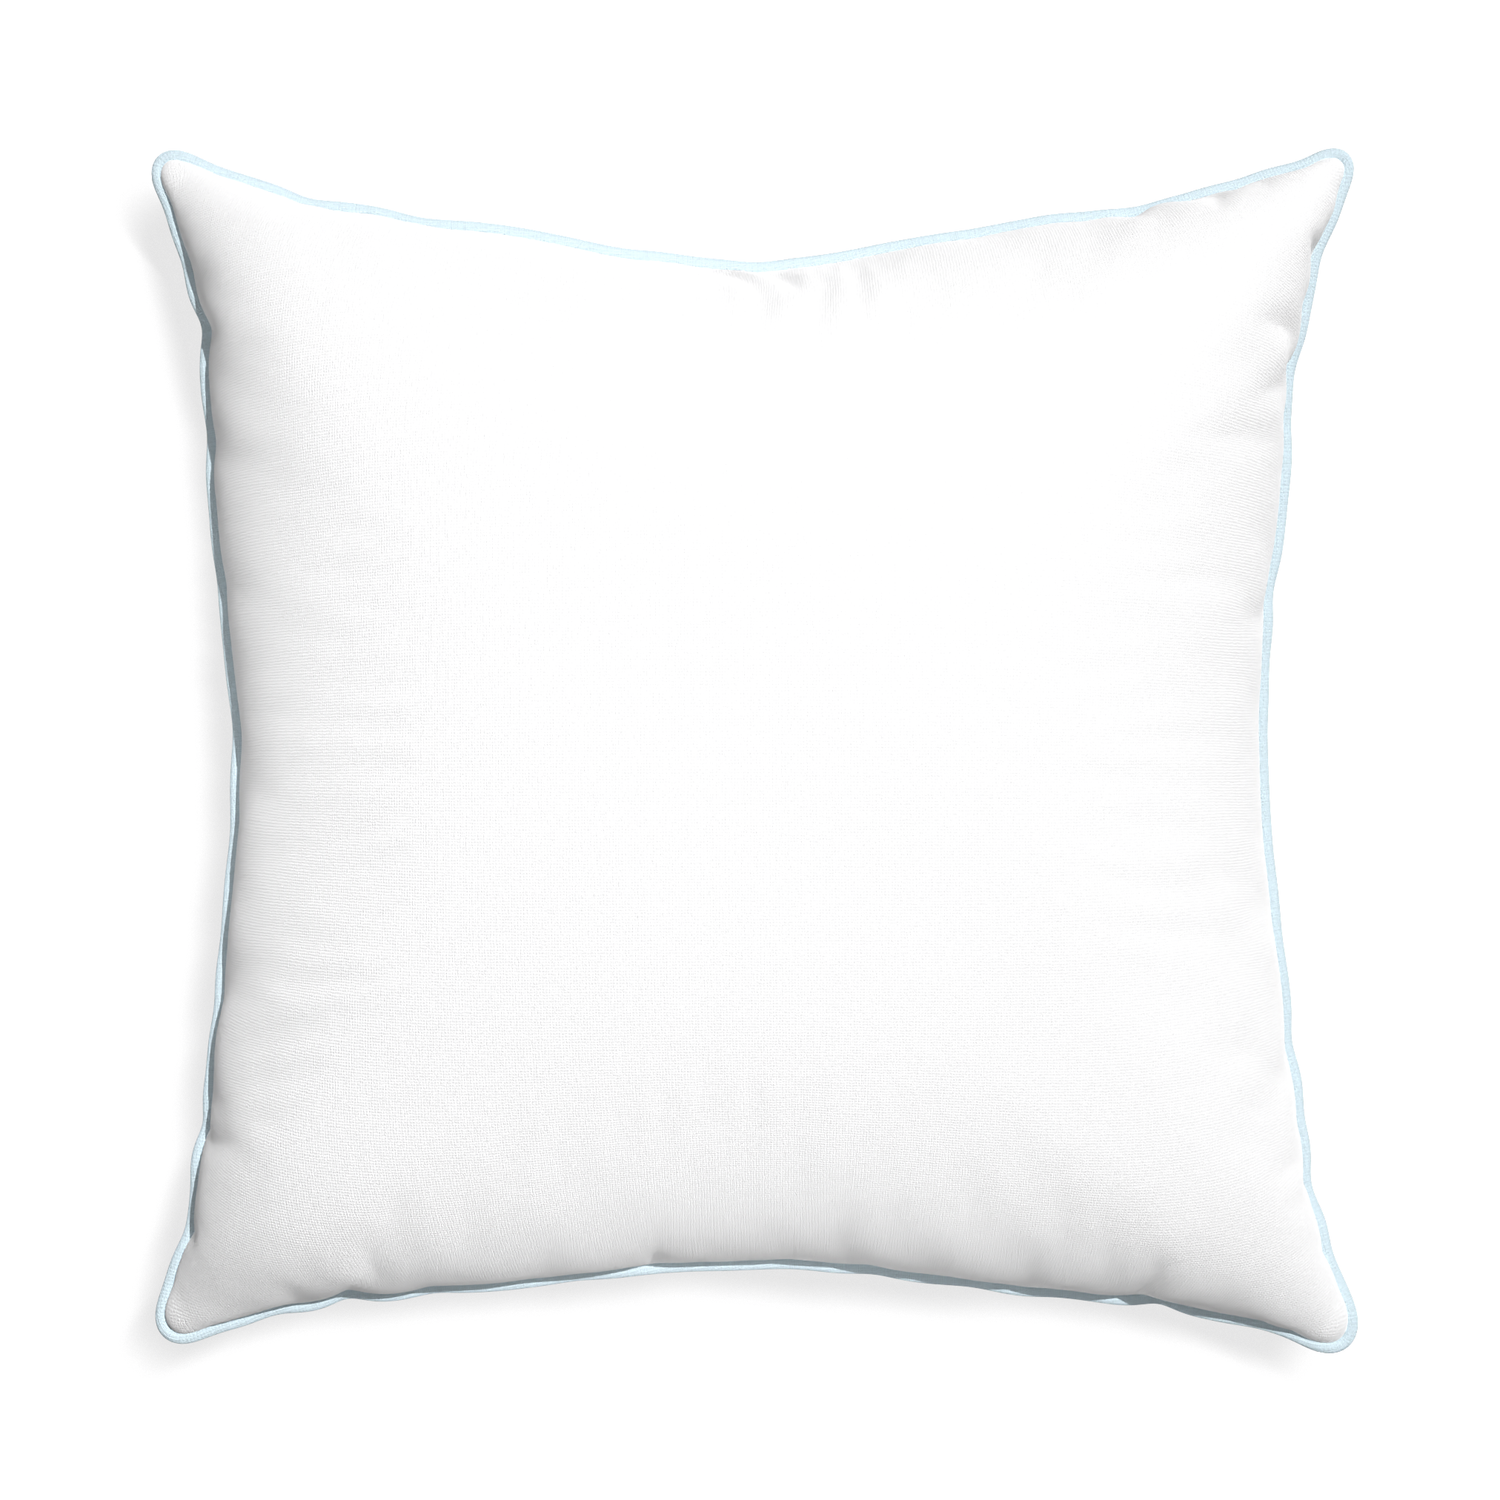 Euro-sham snow custom pillow with powder piping on white background